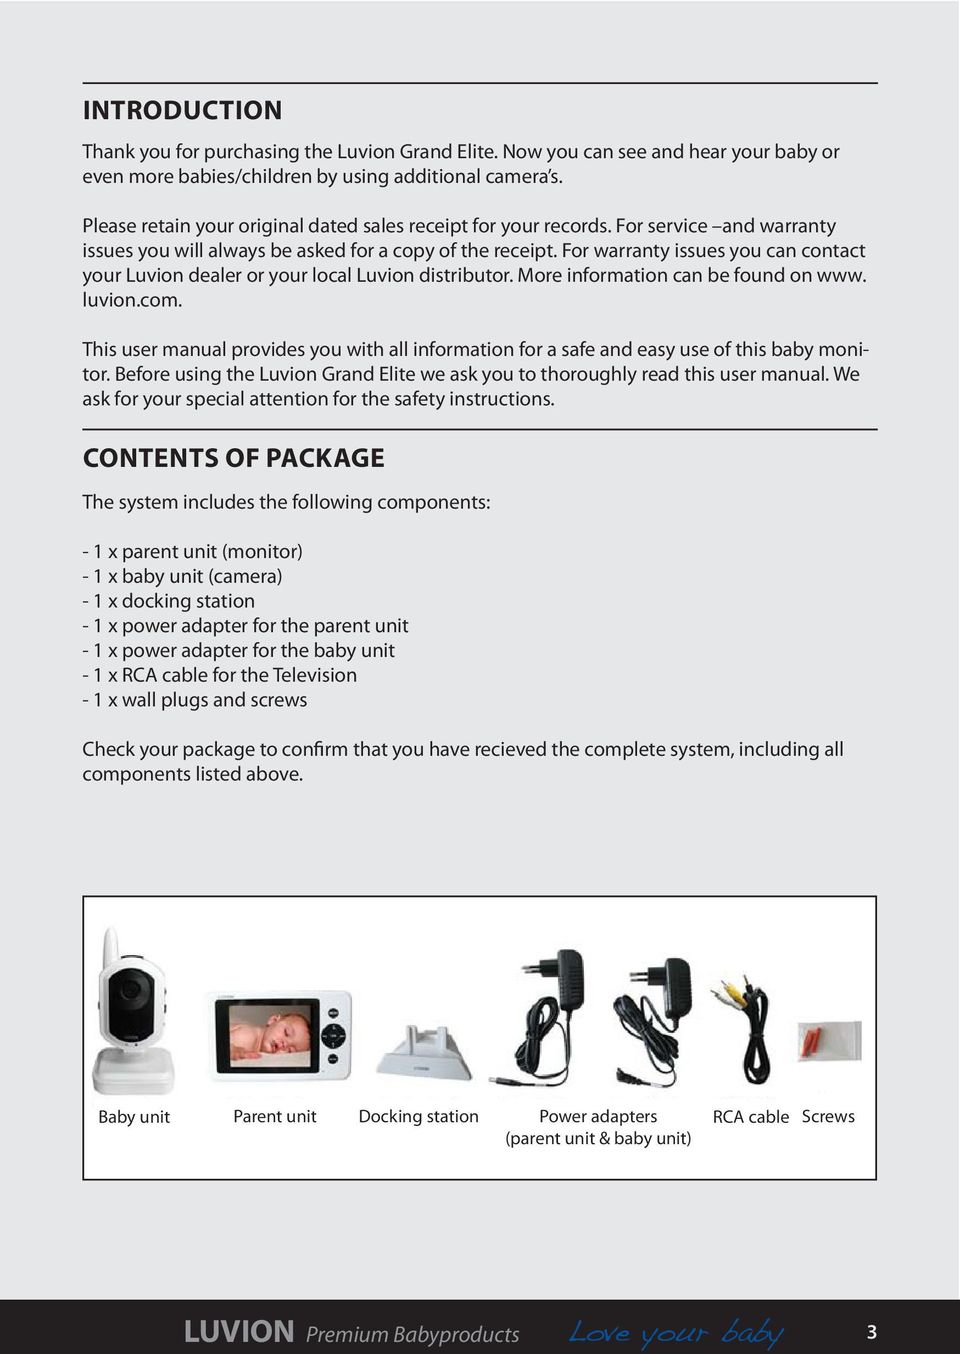 For warranty issues you can contact your Luvion dealer or your local Luvion distributor. More information can be found on www. luvion.com.